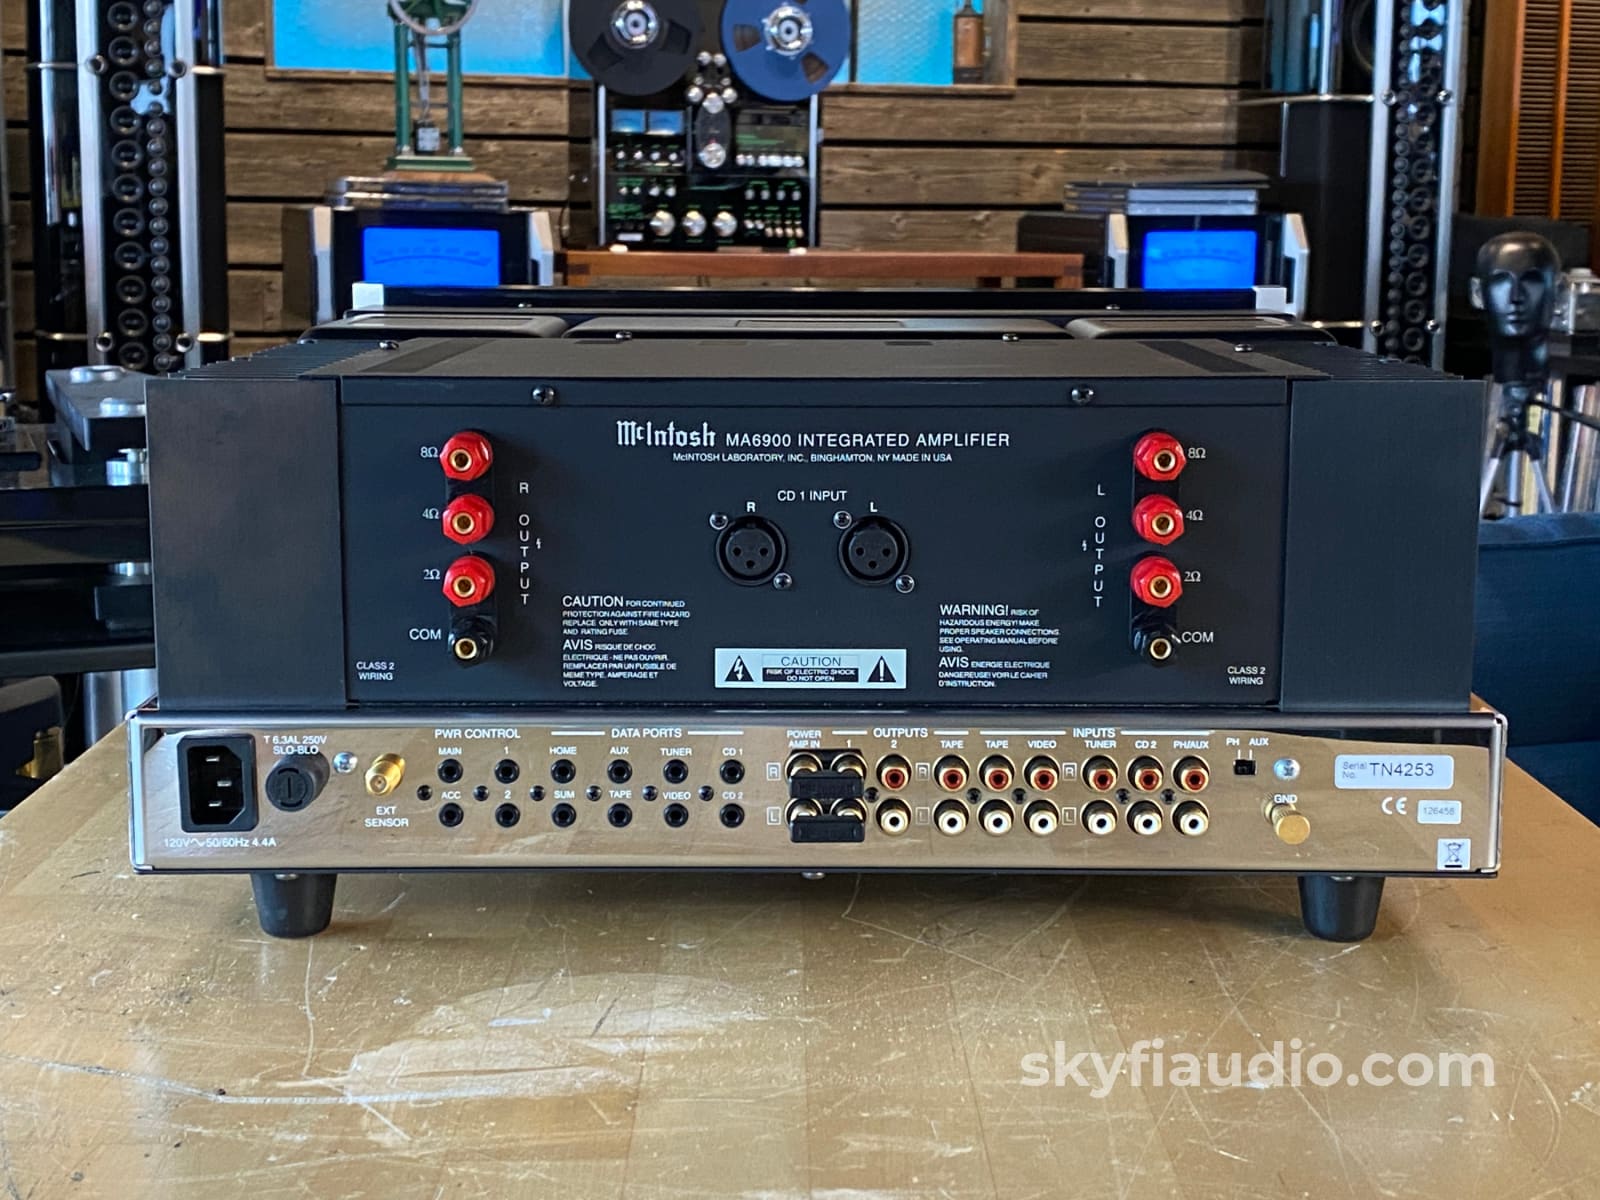 Mcintosh Ma6900 Integrated Amplifier - All Analogue With Built In Phono And Eq